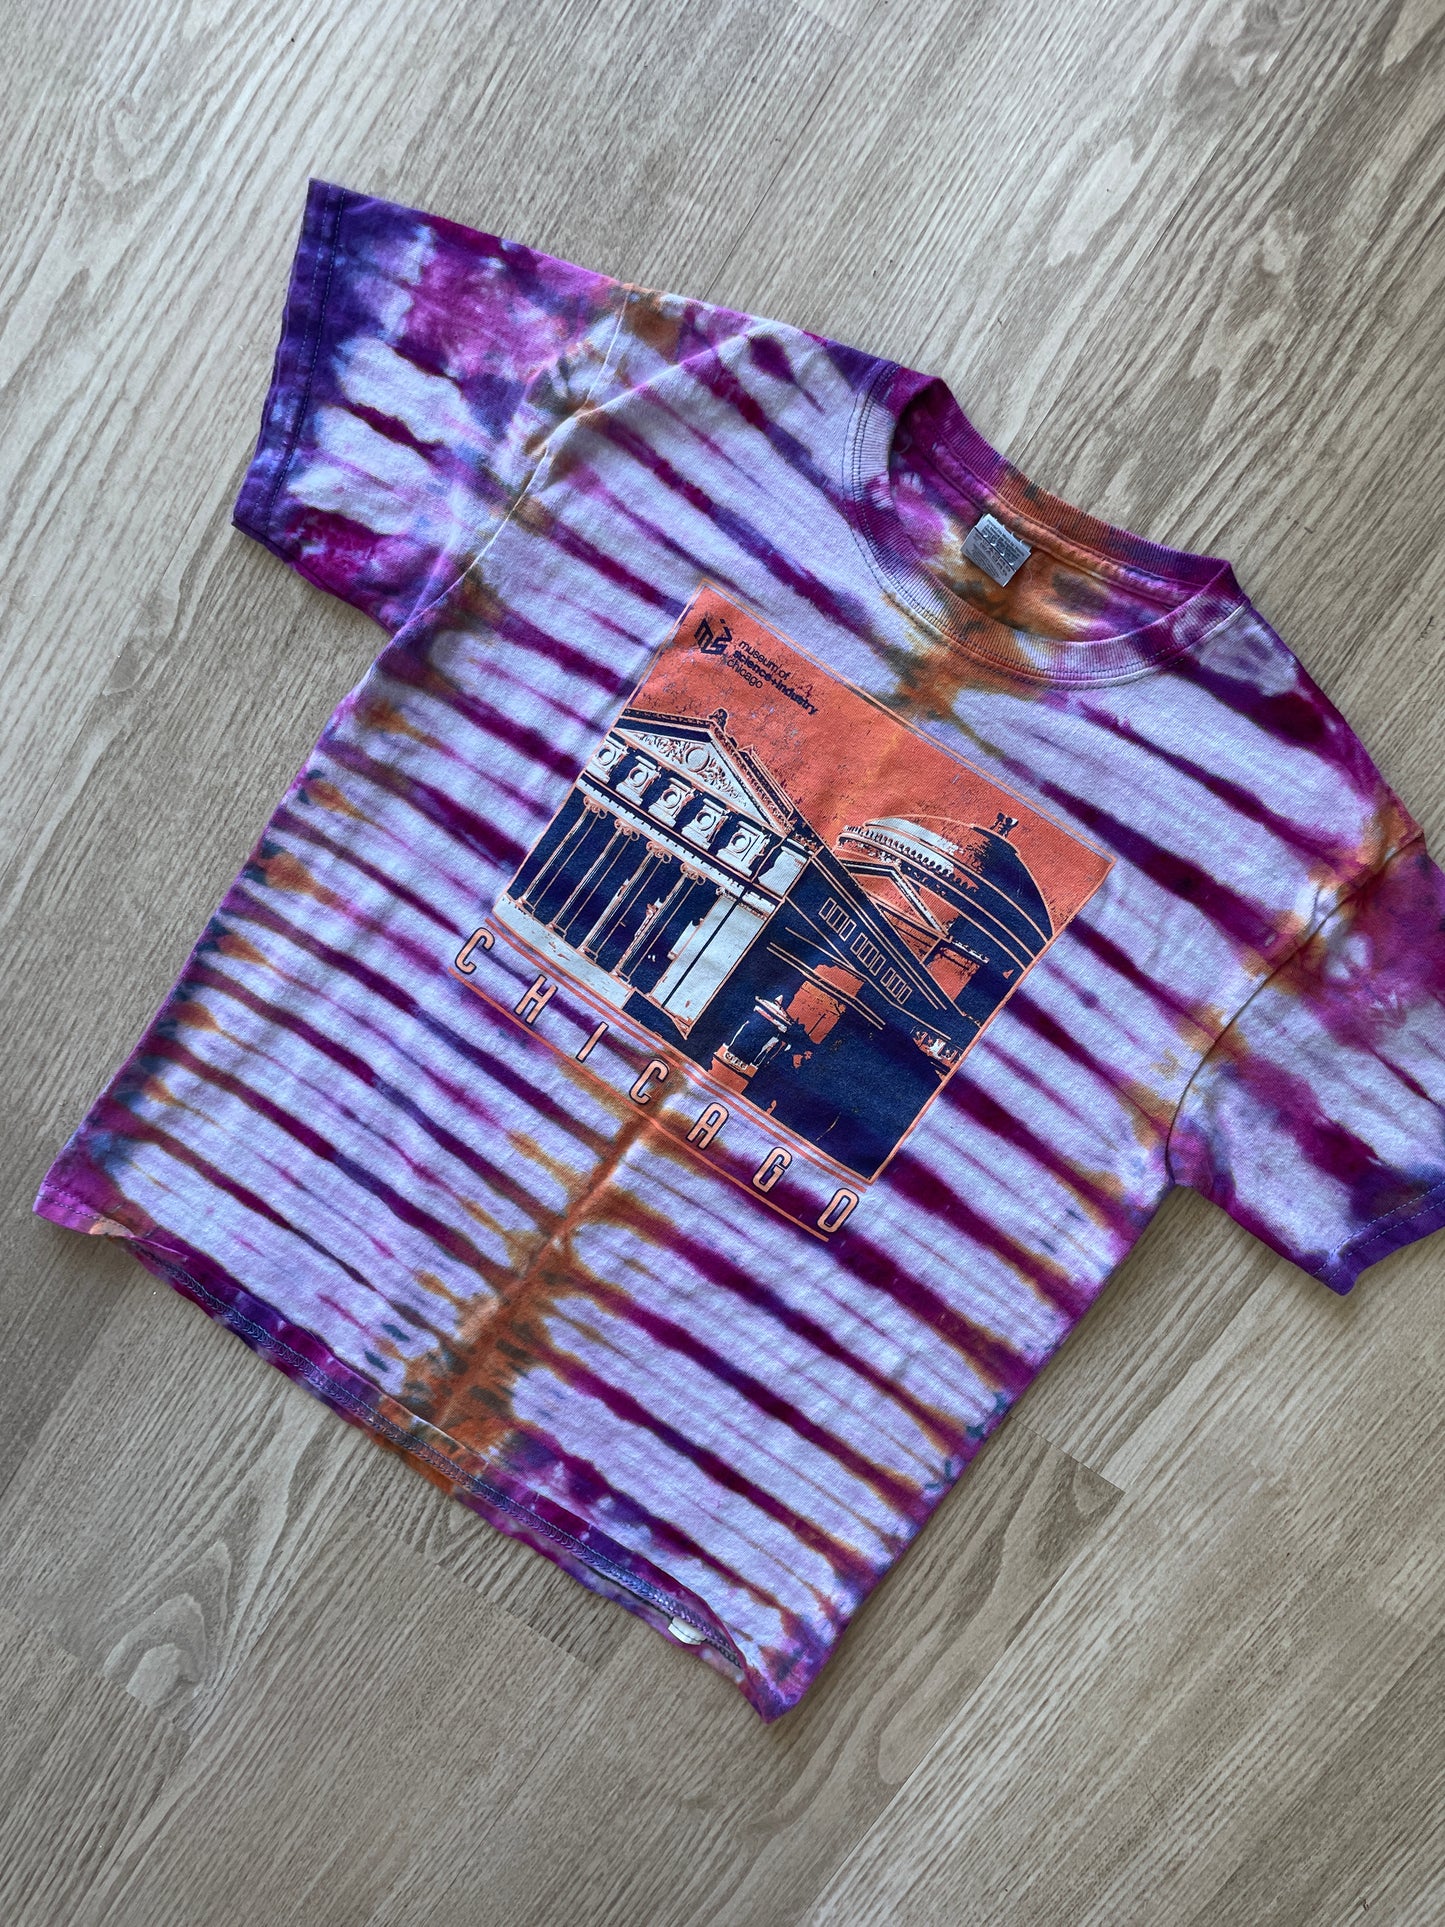 YOUTH MEDIUM Chicago Museum of Science and History Handmade Tie Dye T-Shirt | One-Of-a-Kind Pink and Purple Short Sleeve